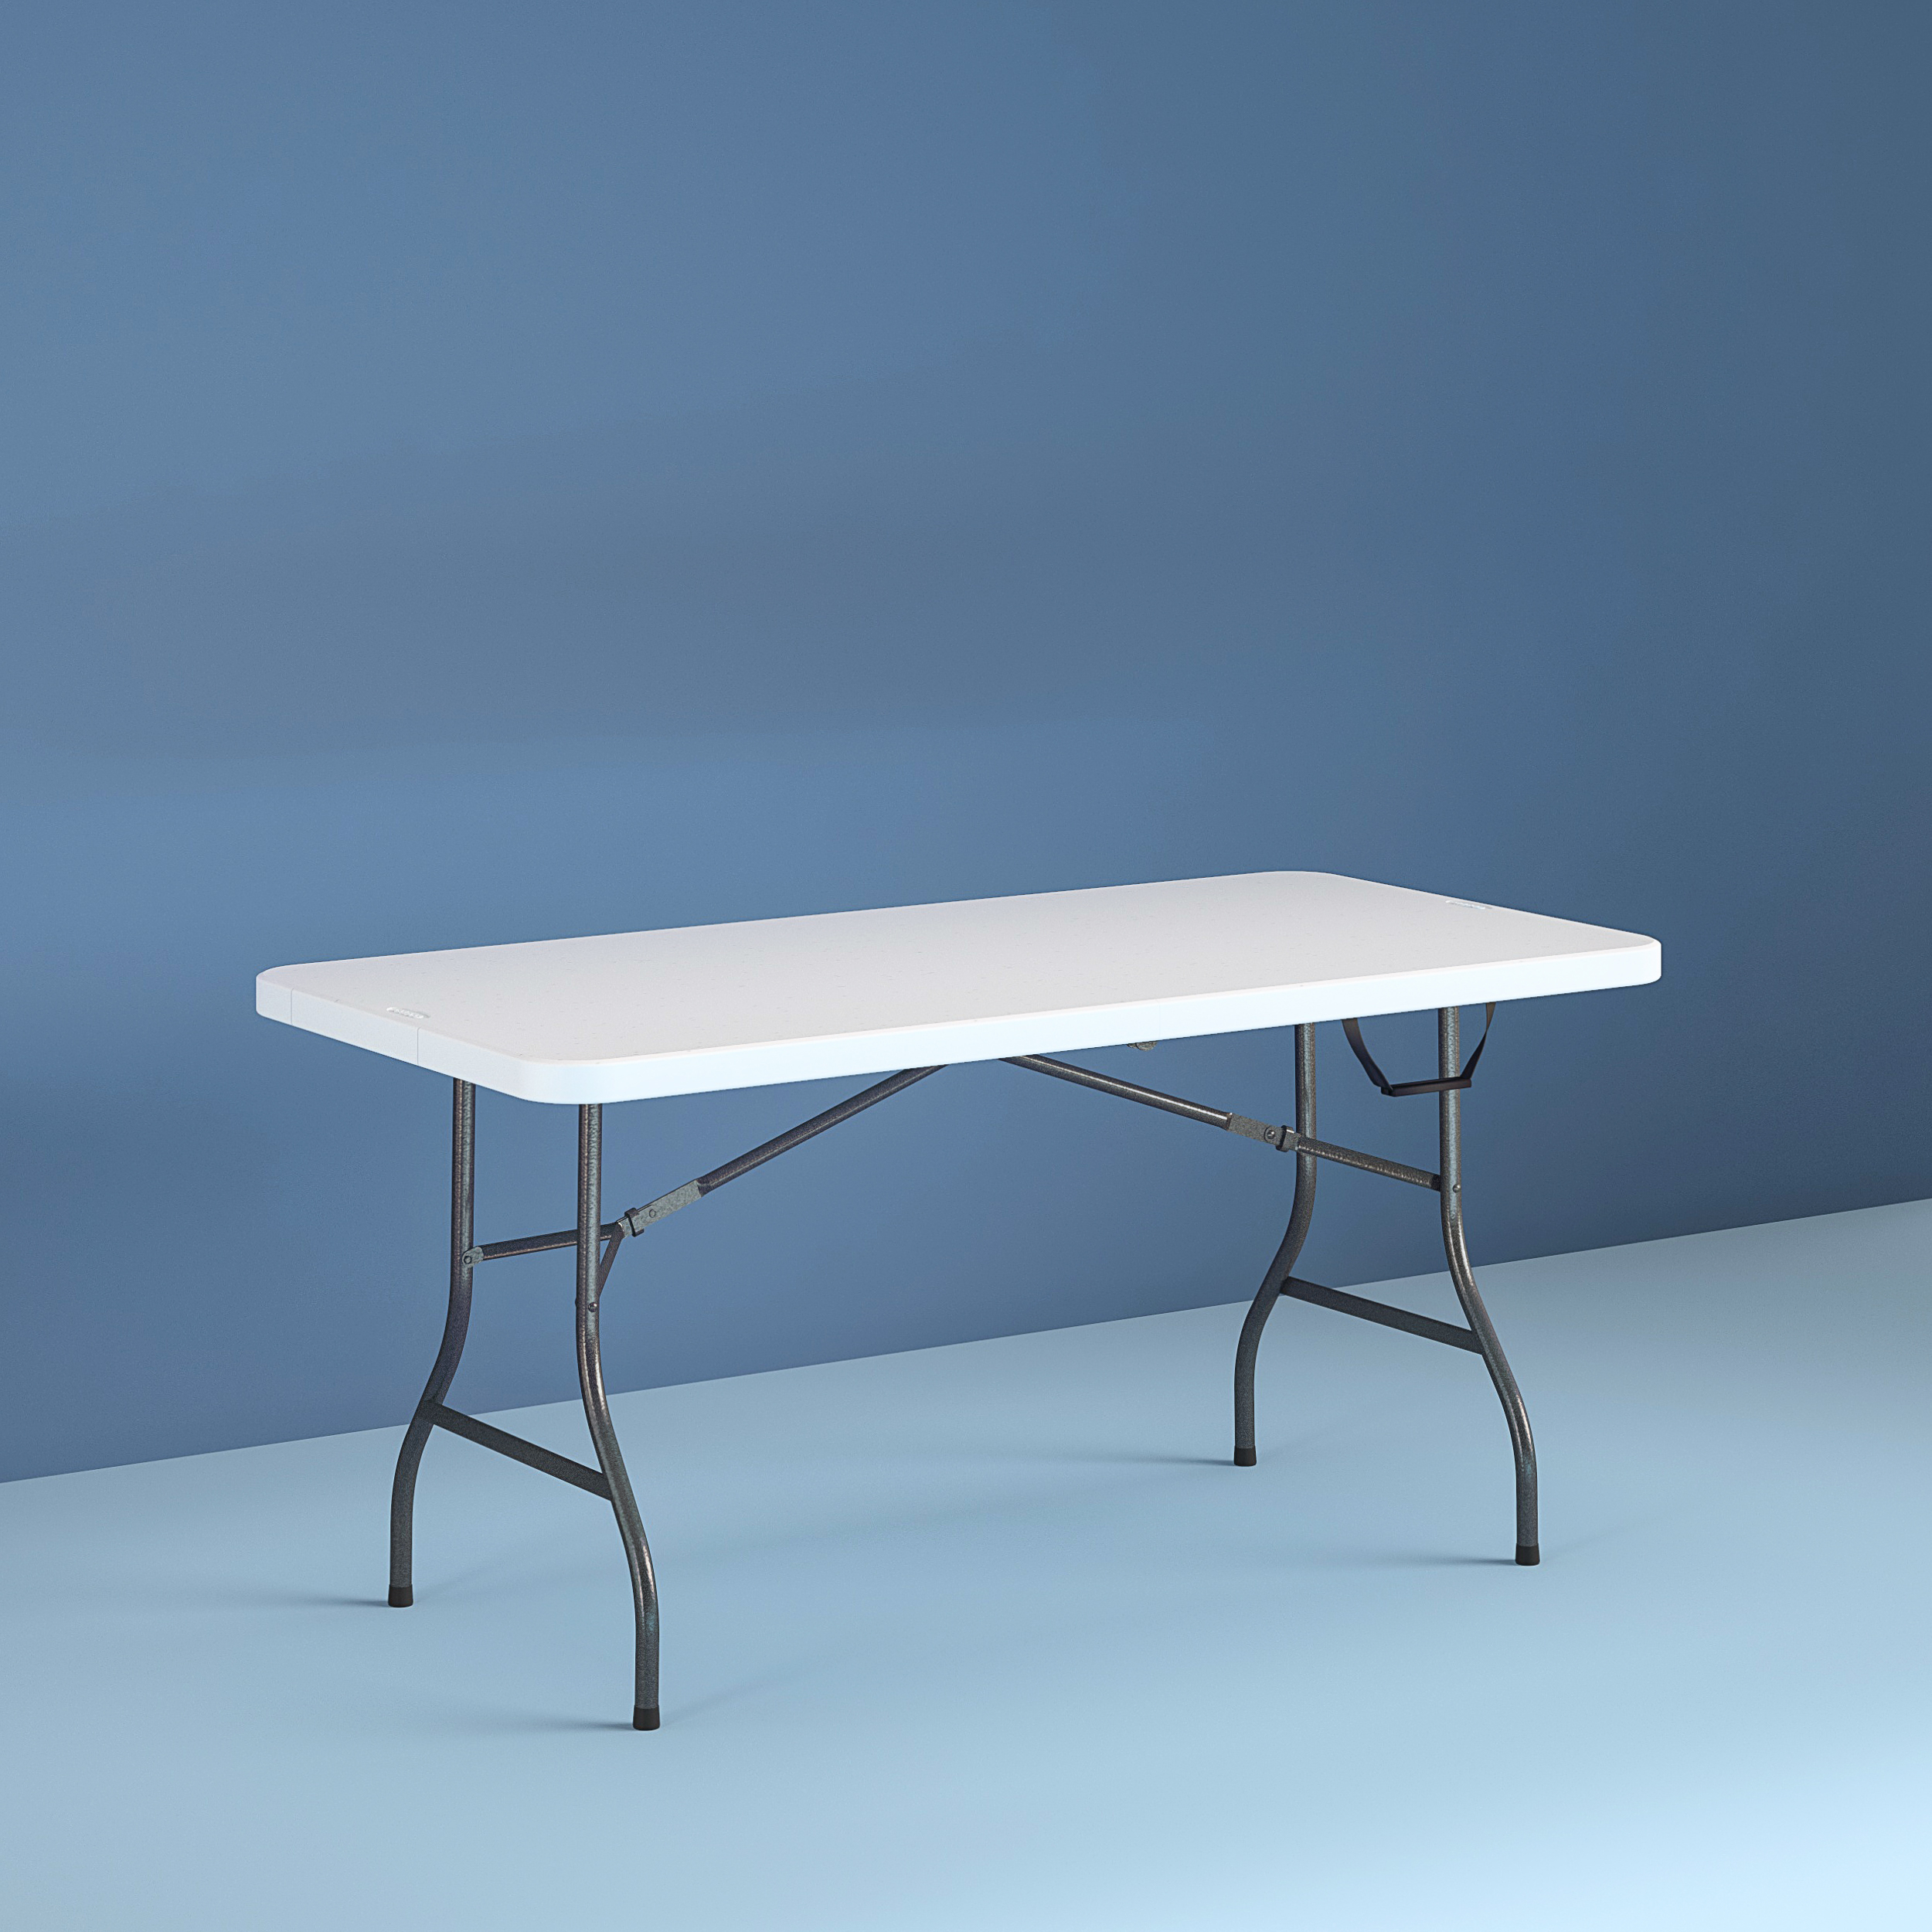 Cosco 6 Foot Premium Folding Table In White Speckle - image 1 of 14